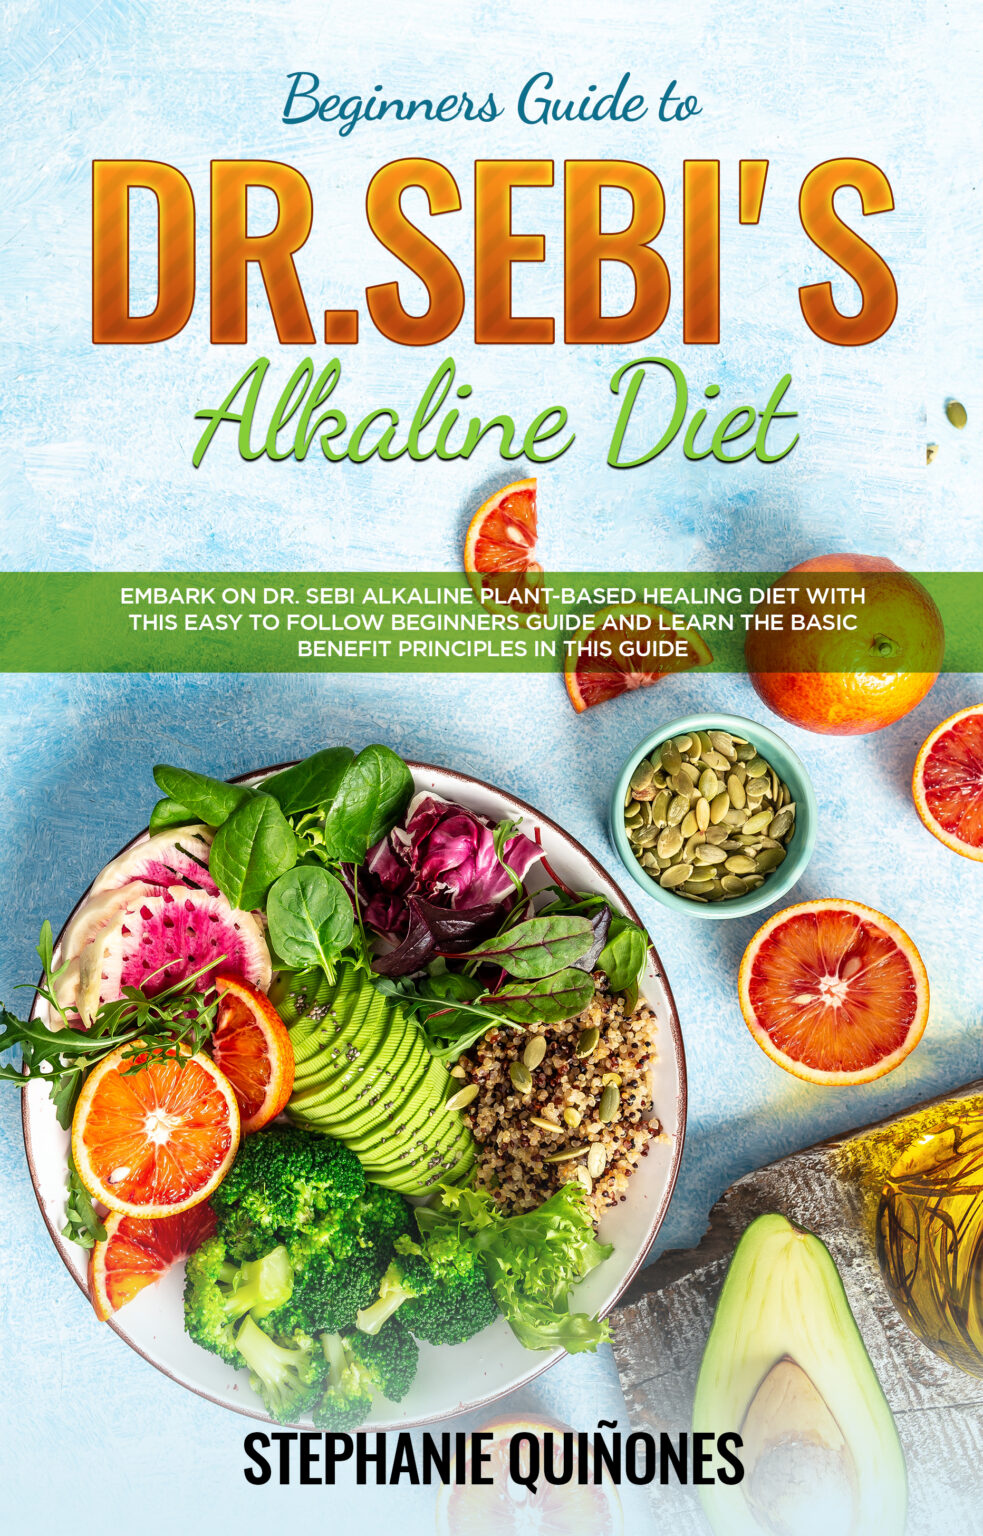 Beginners Guide to Dr Sebis Alkaline Diet ecover